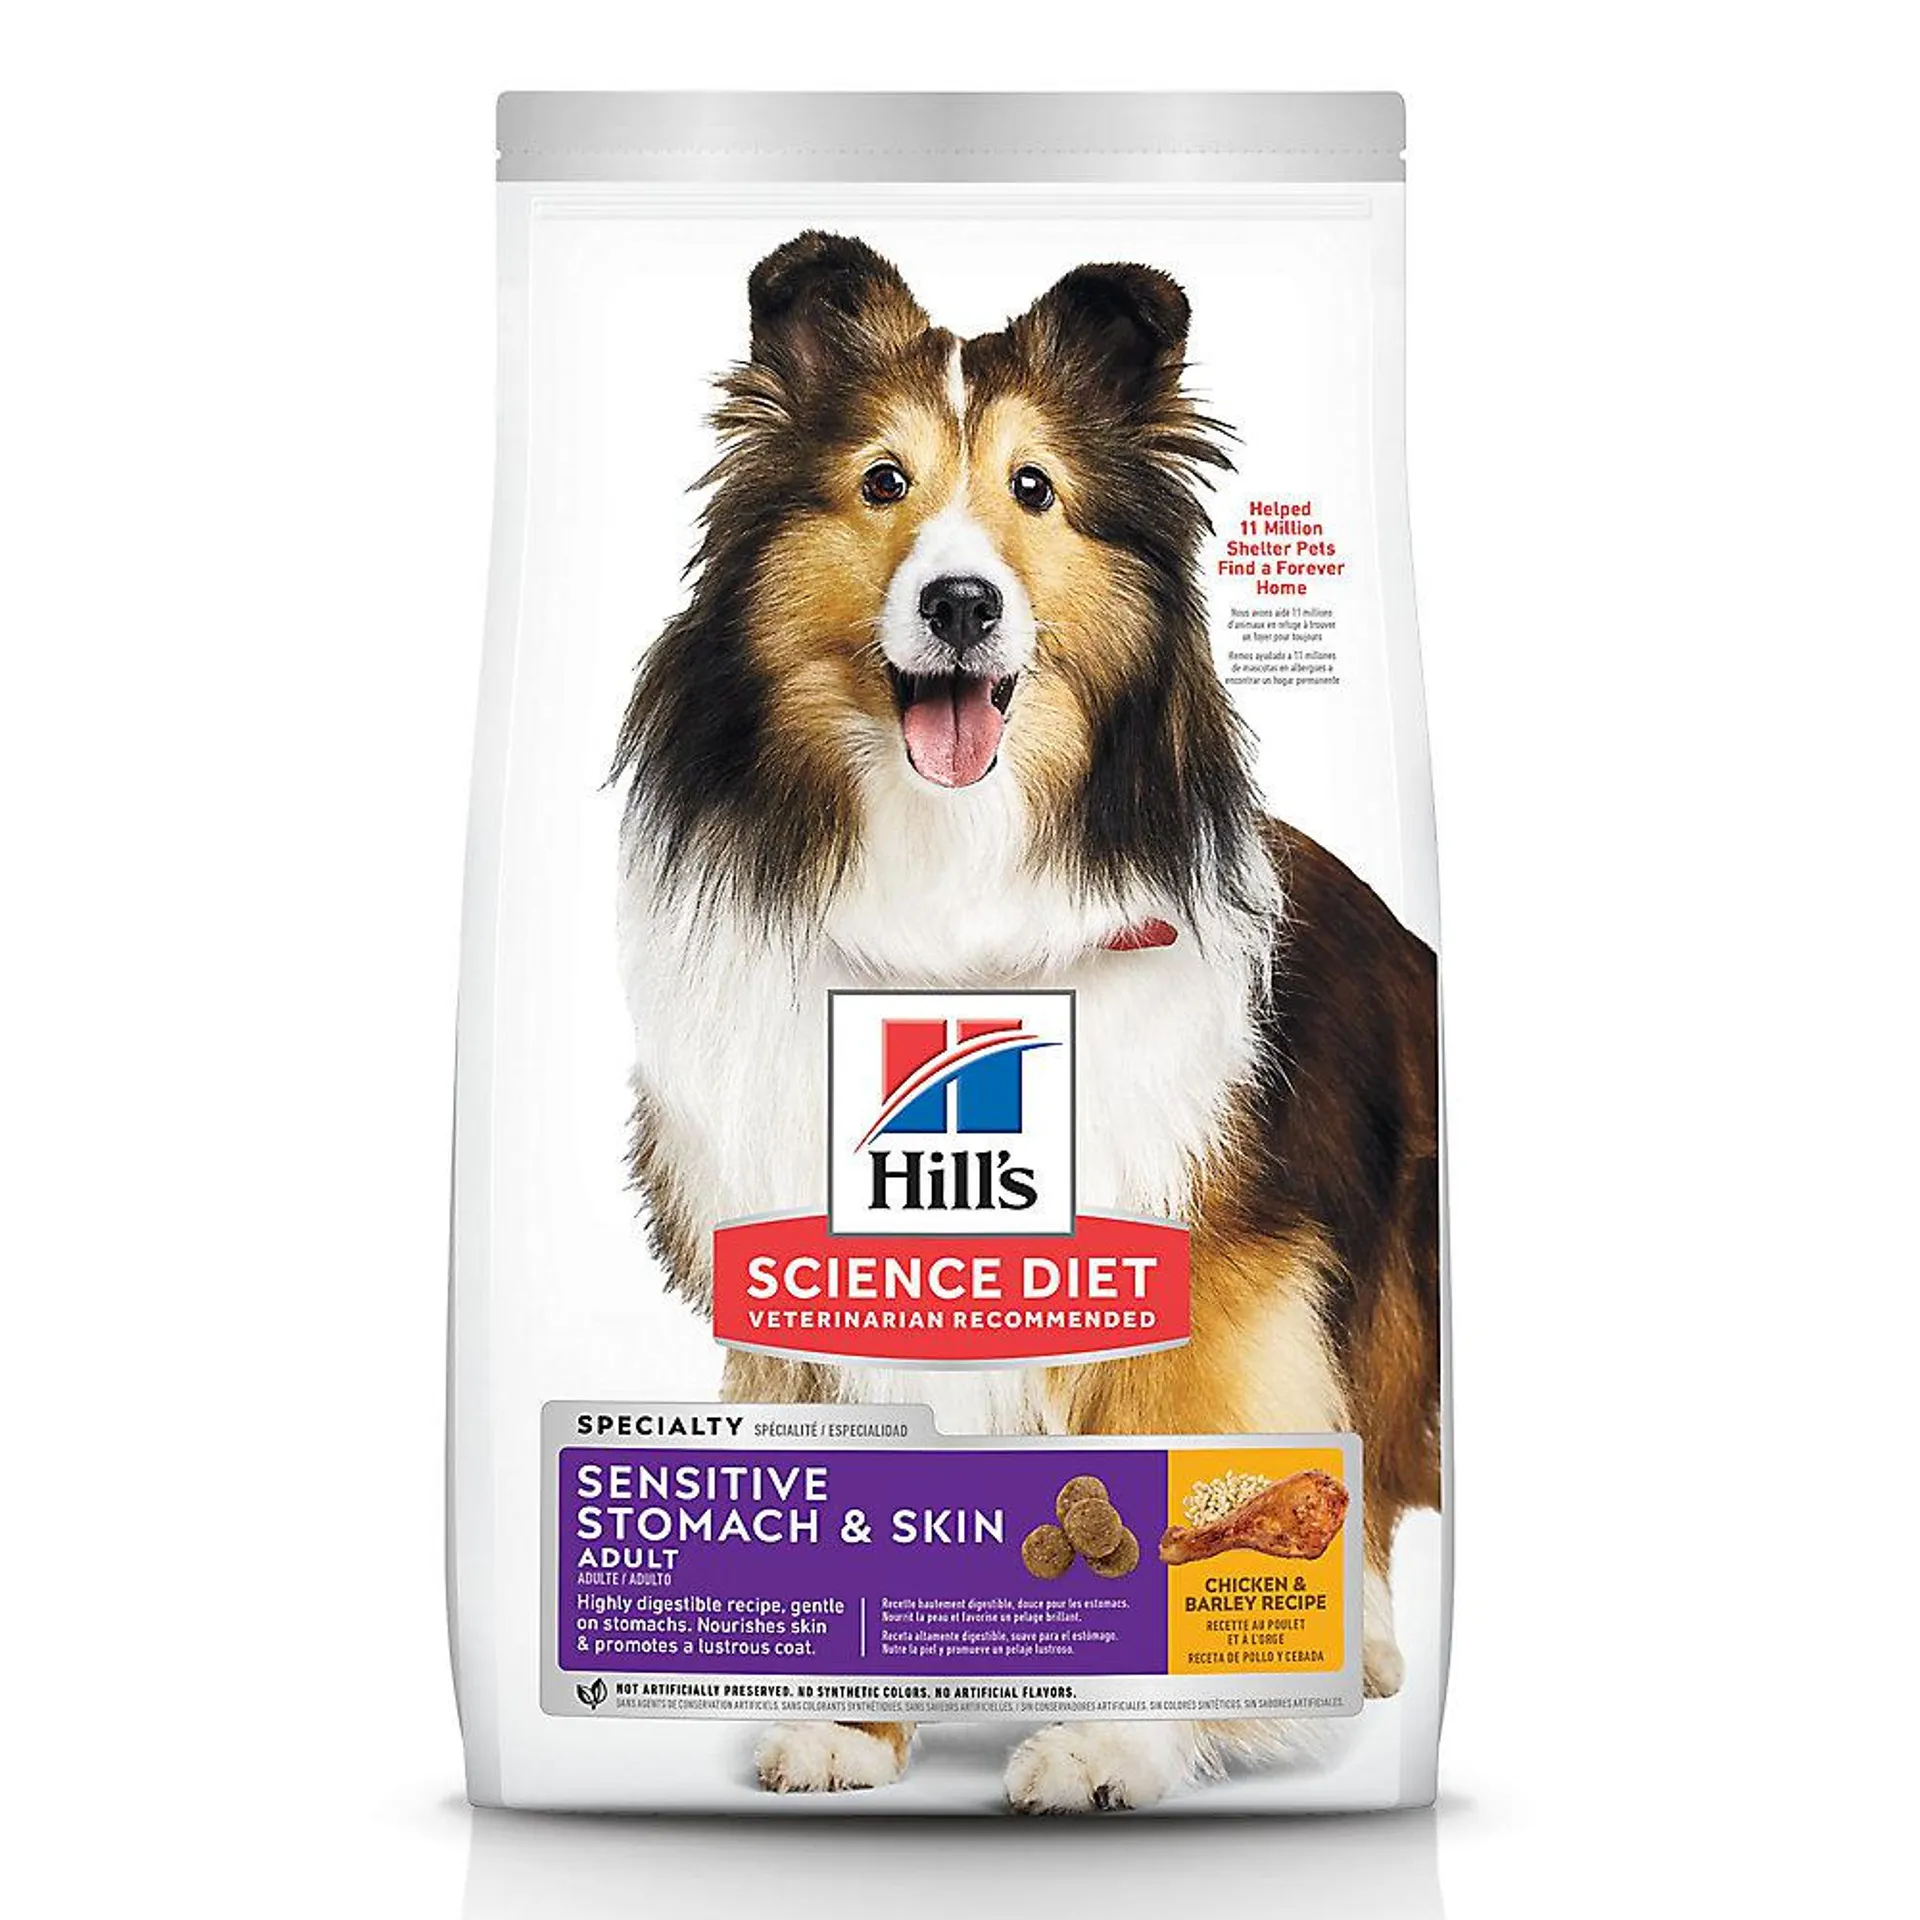 Hill's® Science Diet® Sensitive Stomach & Skin Adult Dry Dog Food - Chicken & Barley